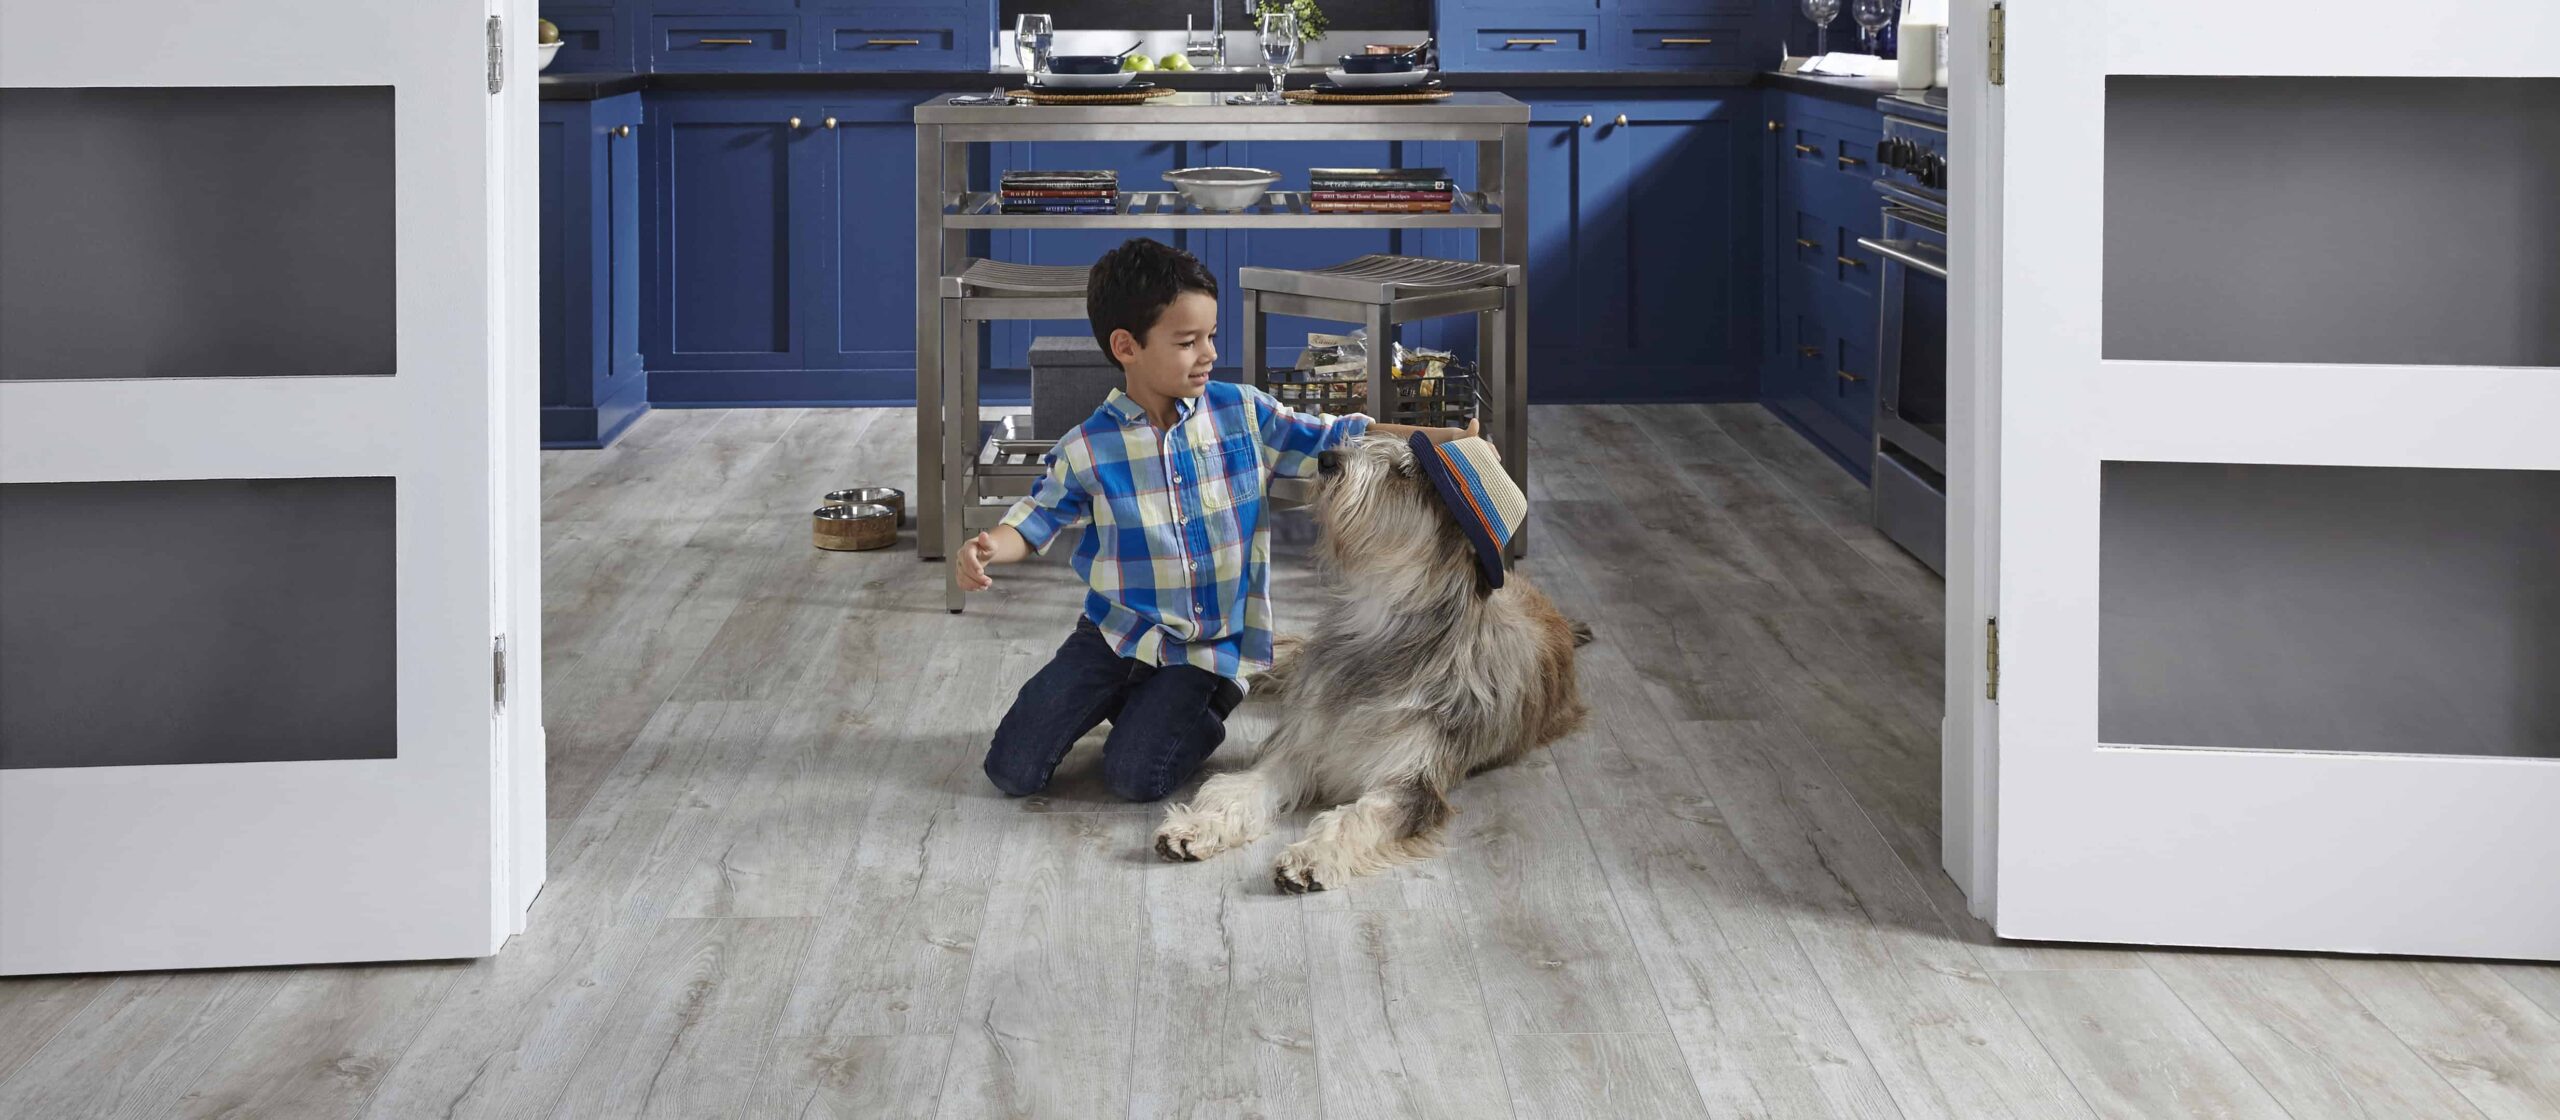 Kid and Dog playing in kitchen on Aspen Frost Flooring